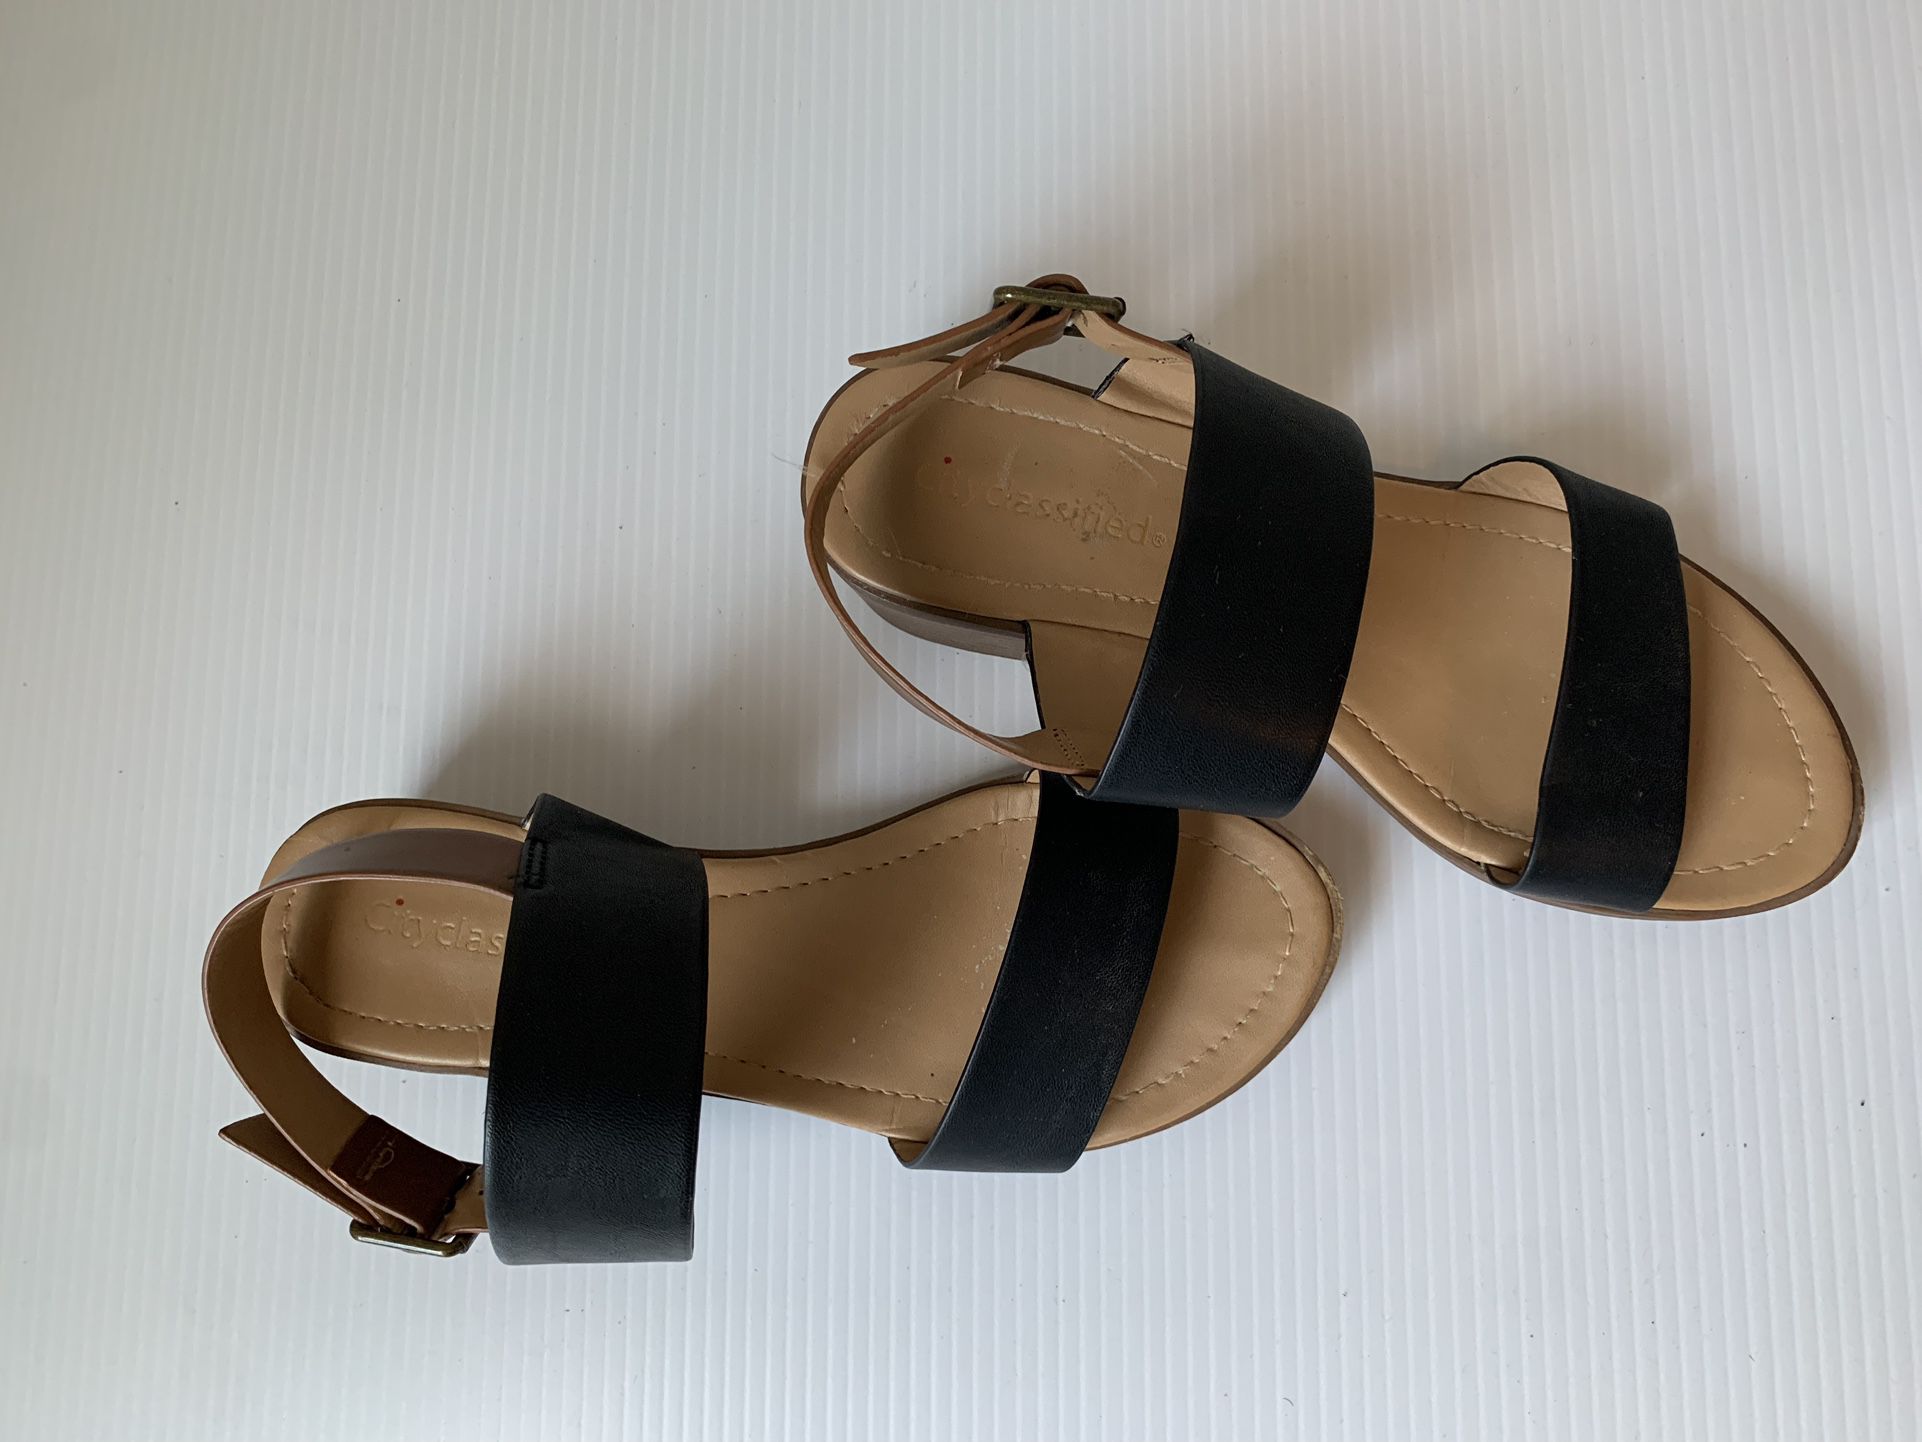 City classified Sandals-size 7.5